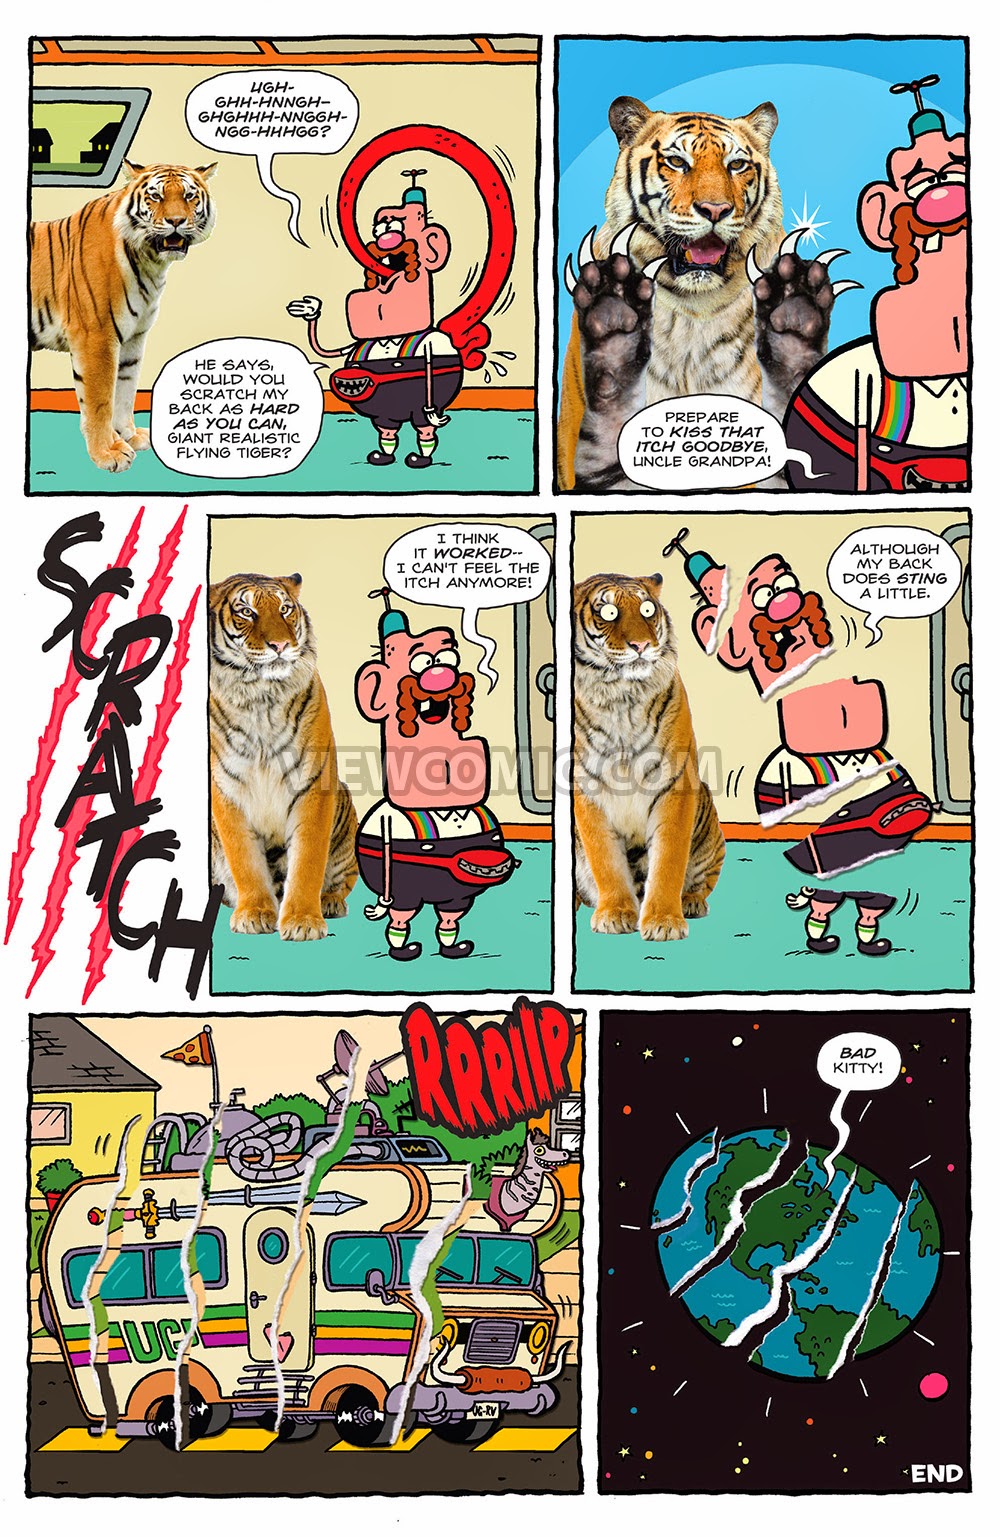 Uncle Grandpa 002 2014 | Read Uncle Grandpa 002 2014 comic online in high  quality. Read Full Comic online for free - Read comics online in high  quality .|viewcomiconline.com